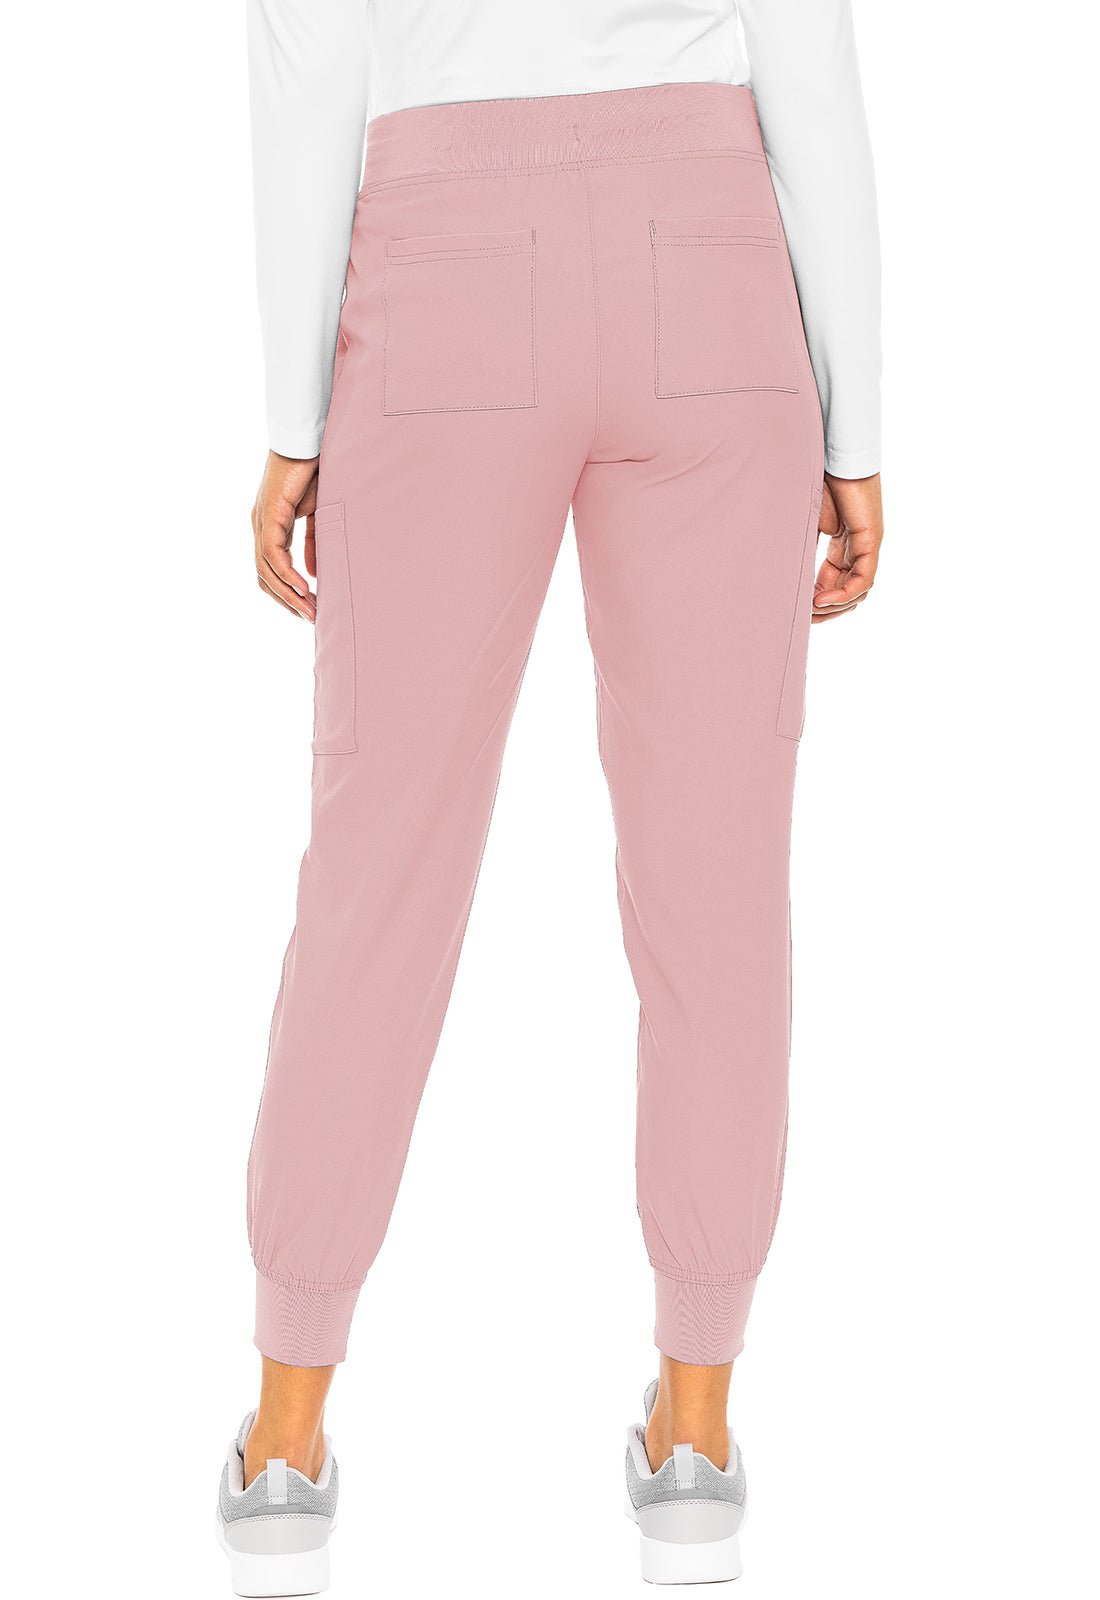 Jogger Athletic  Pant by Med Couture (Regular) XS-5XL / Perfectly Pink